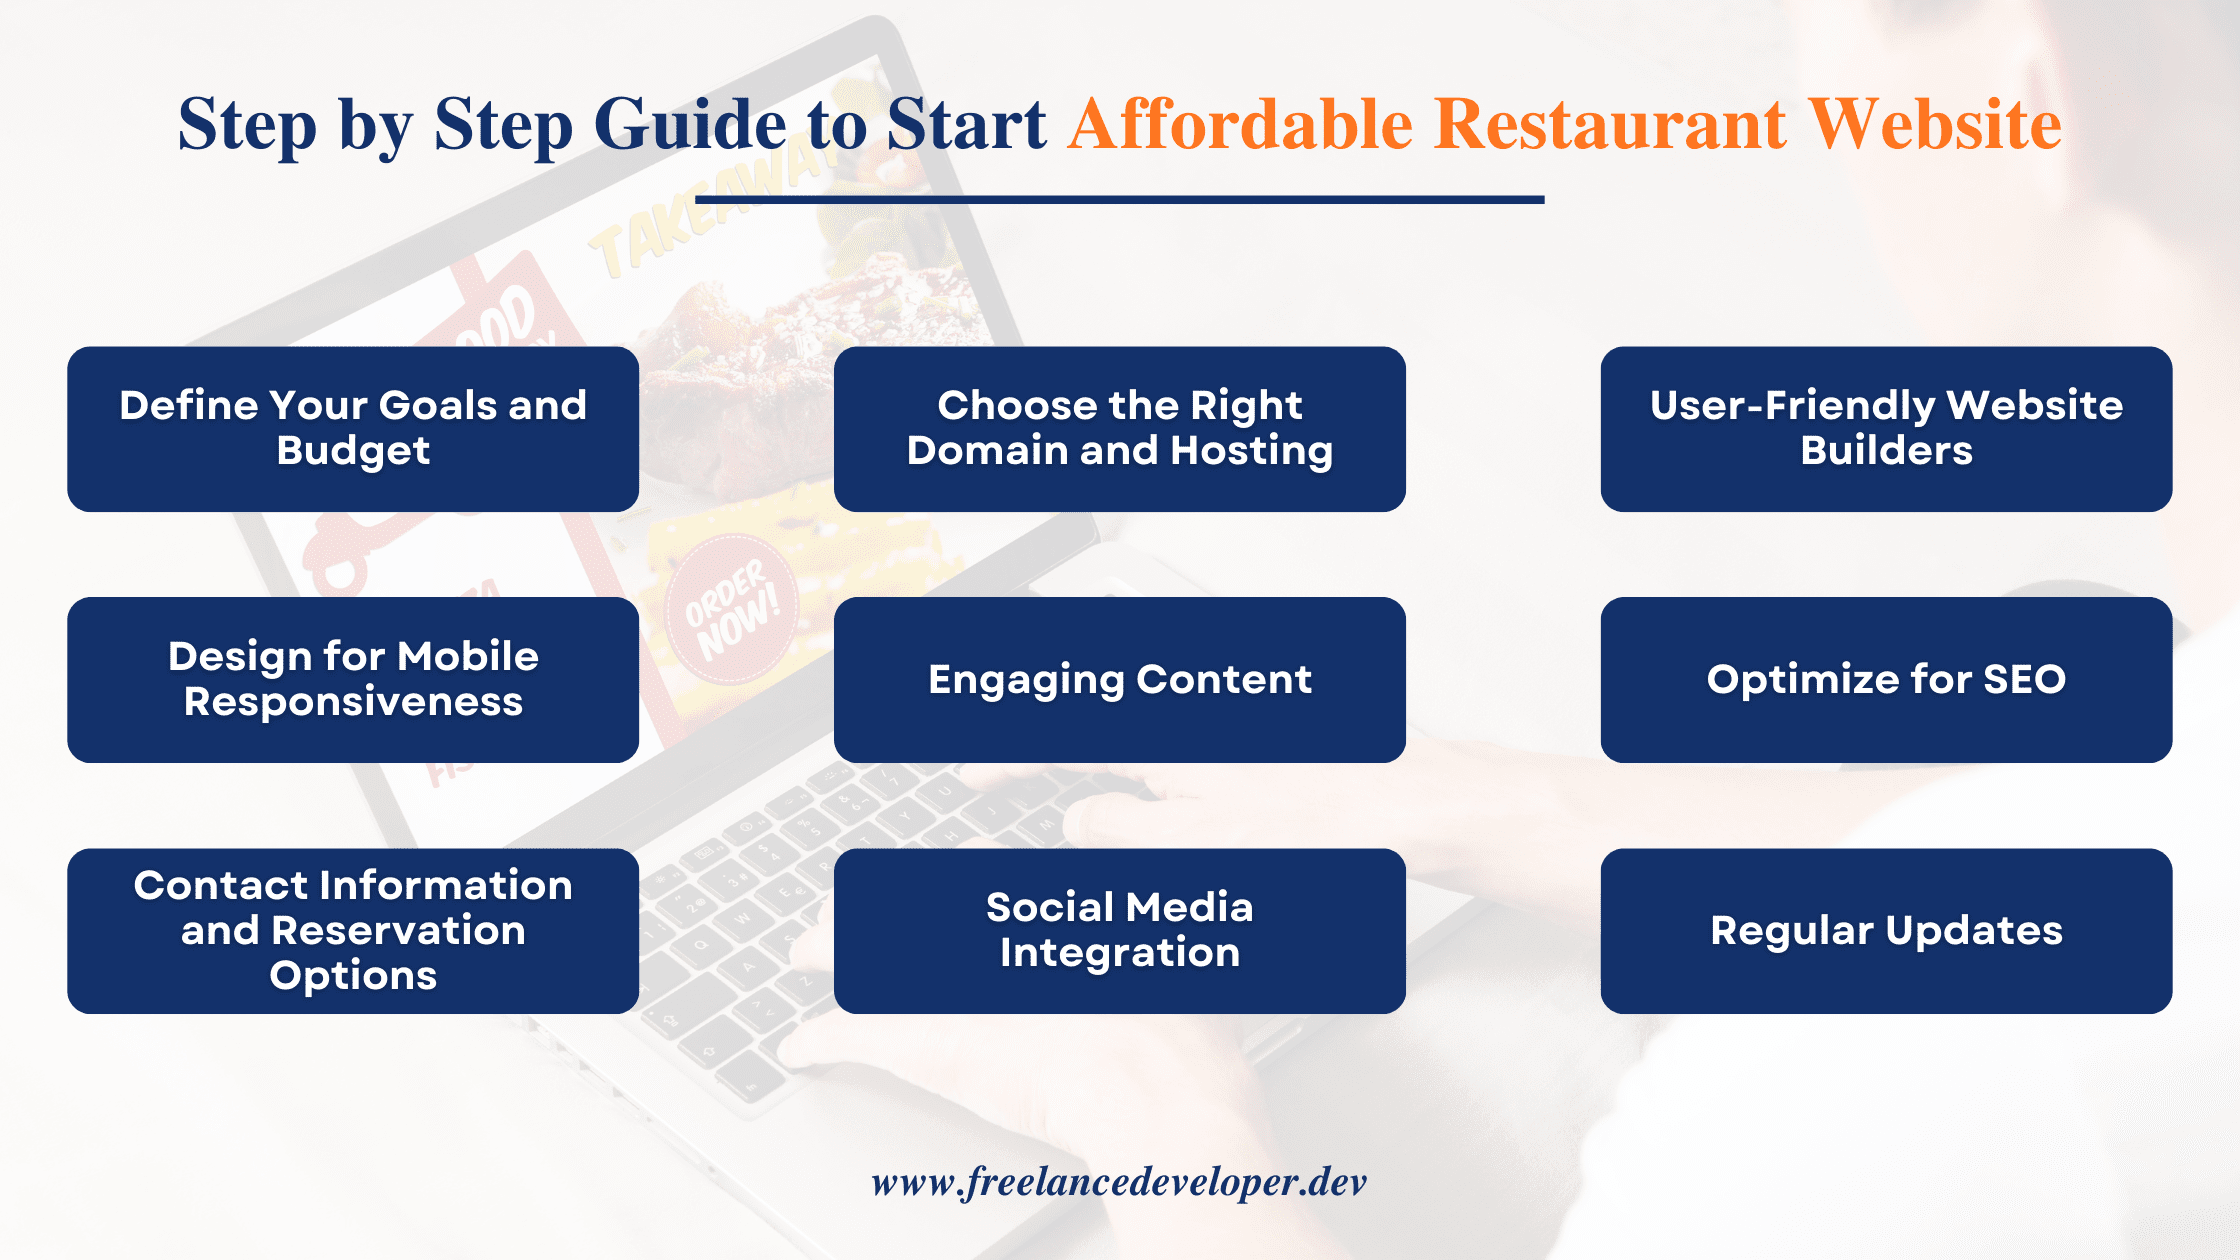 Step by Step Guide to Start Affordable Restaurant Website